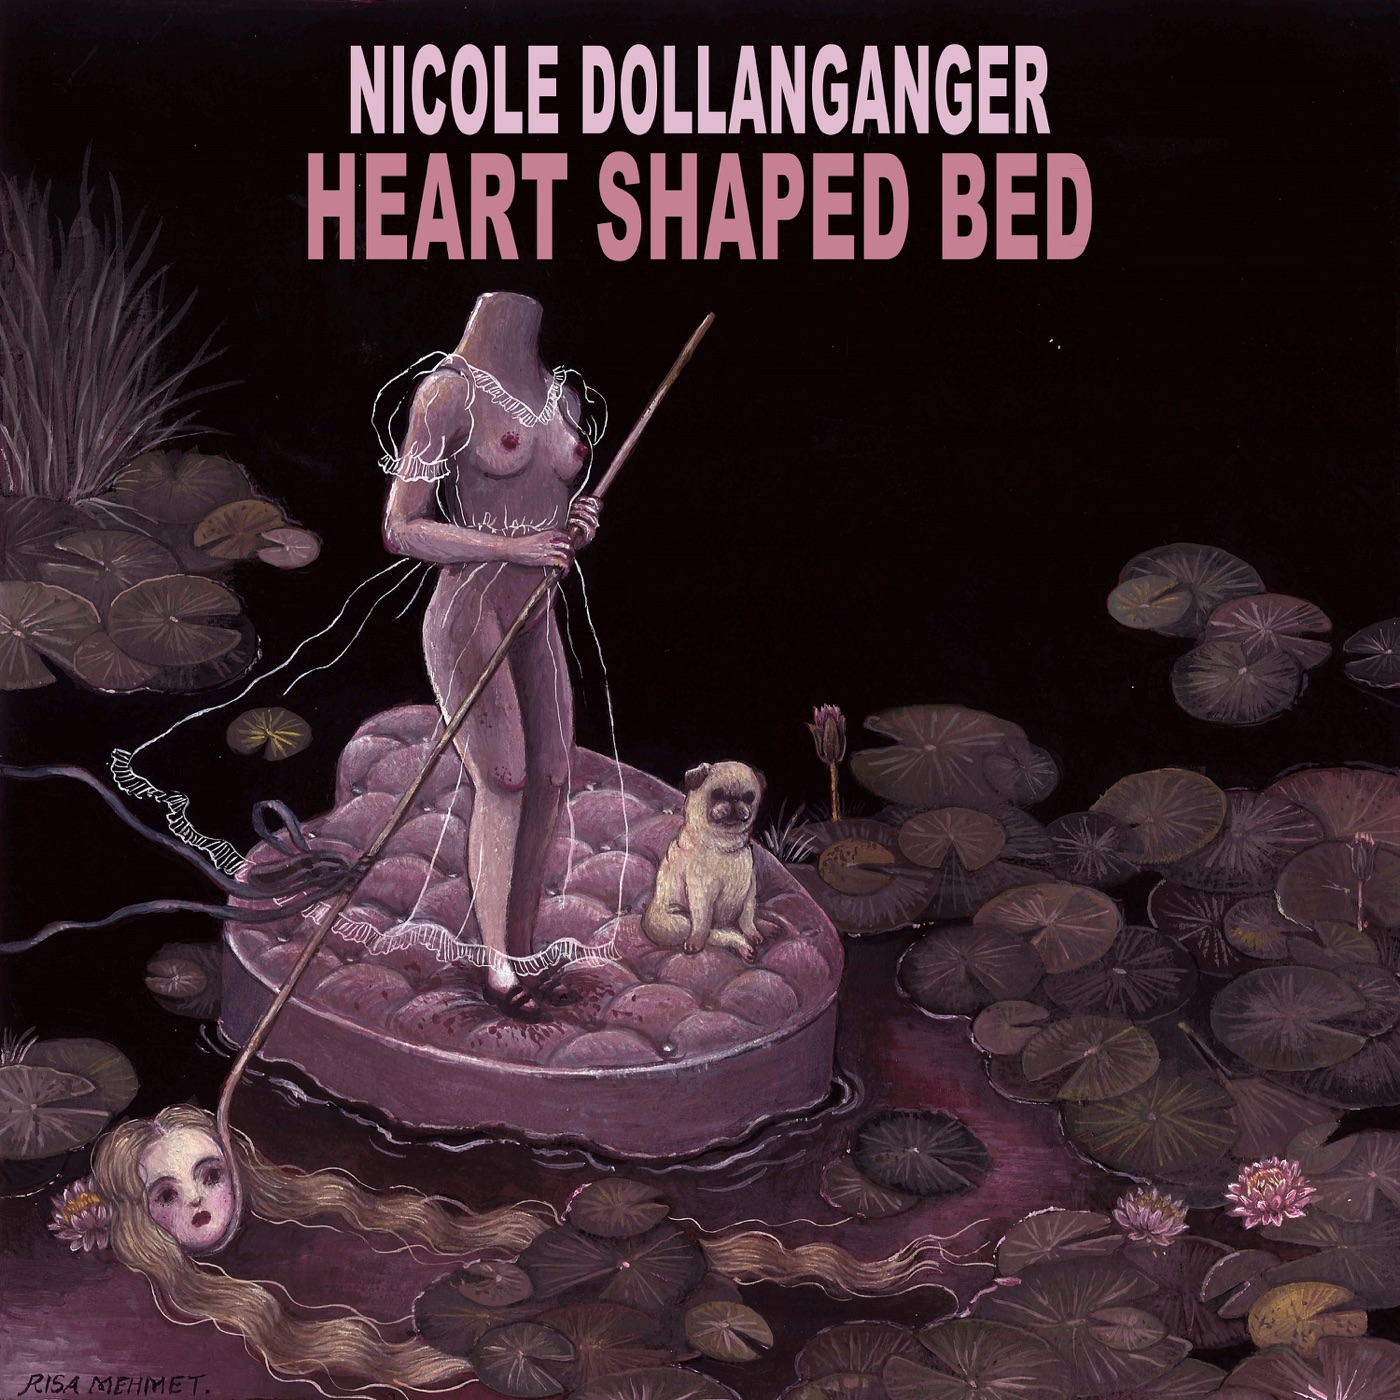 Heart Shaped Bed by Nicole Dollanganger